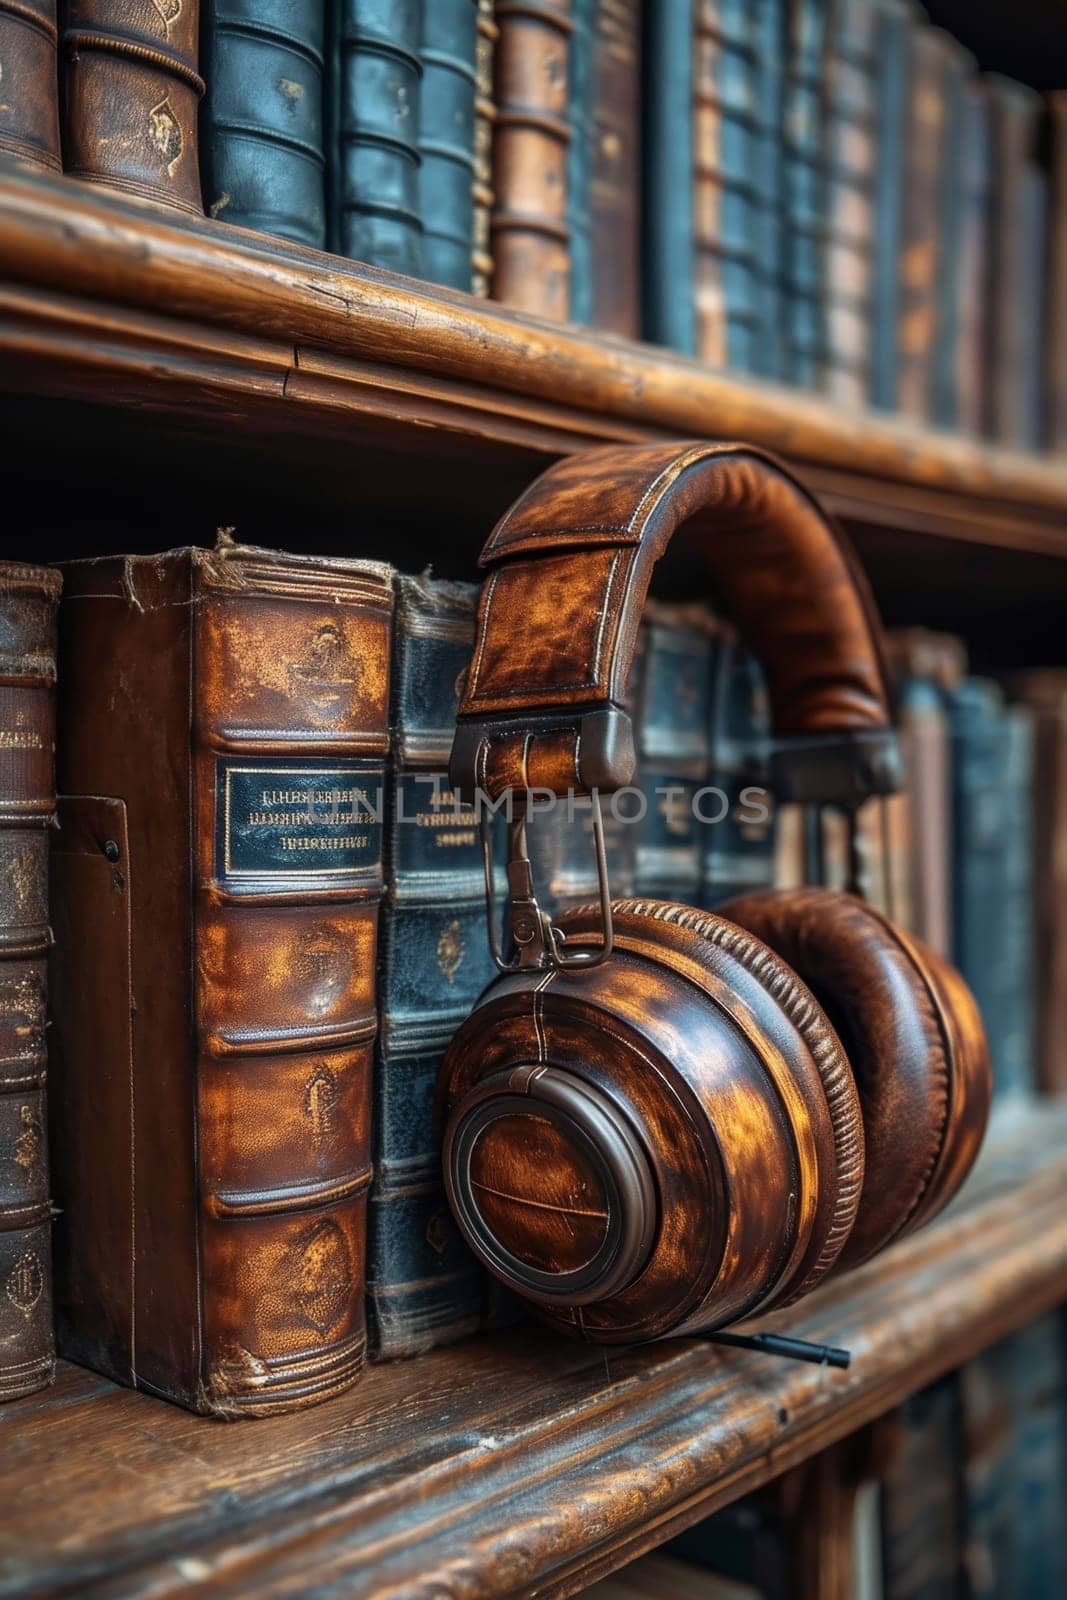 Headphones and a stack of books lie on a wooden table in the library.